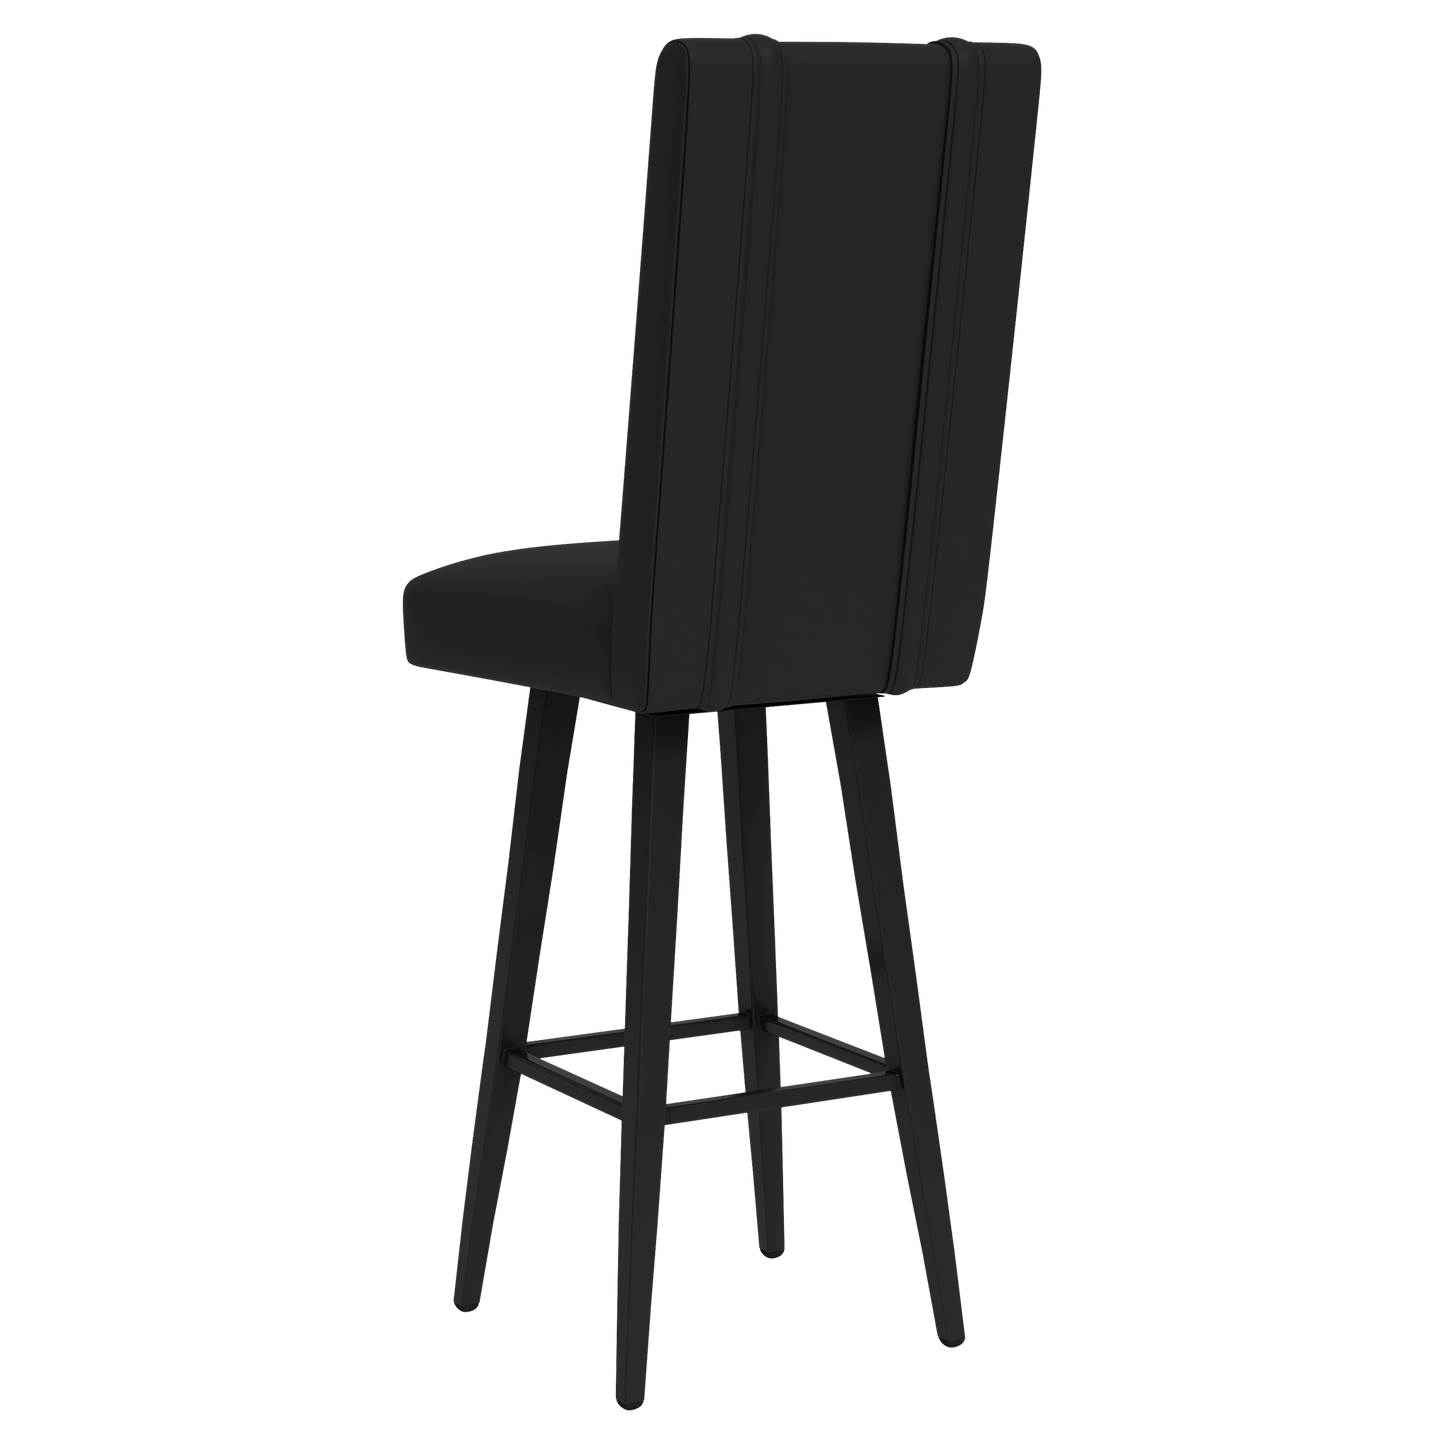 Swivel Bar Stool 2000 with Dodgers Cooperstown Secondary